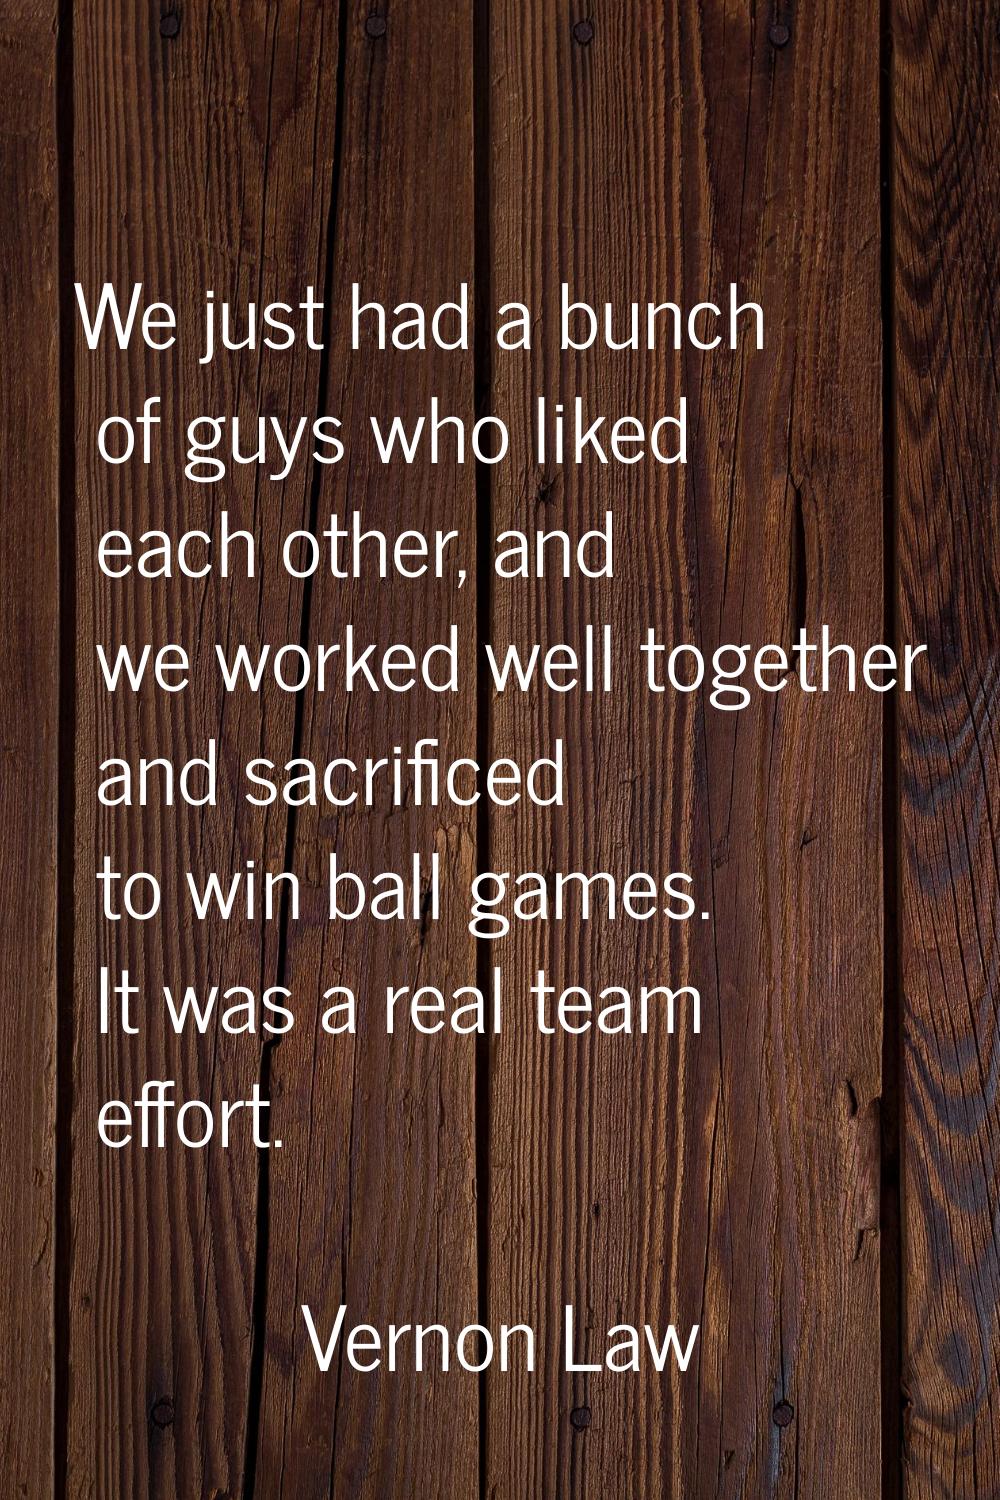 We just had a bunch of guys who liked each other, and we worked well together and sacrificed to win